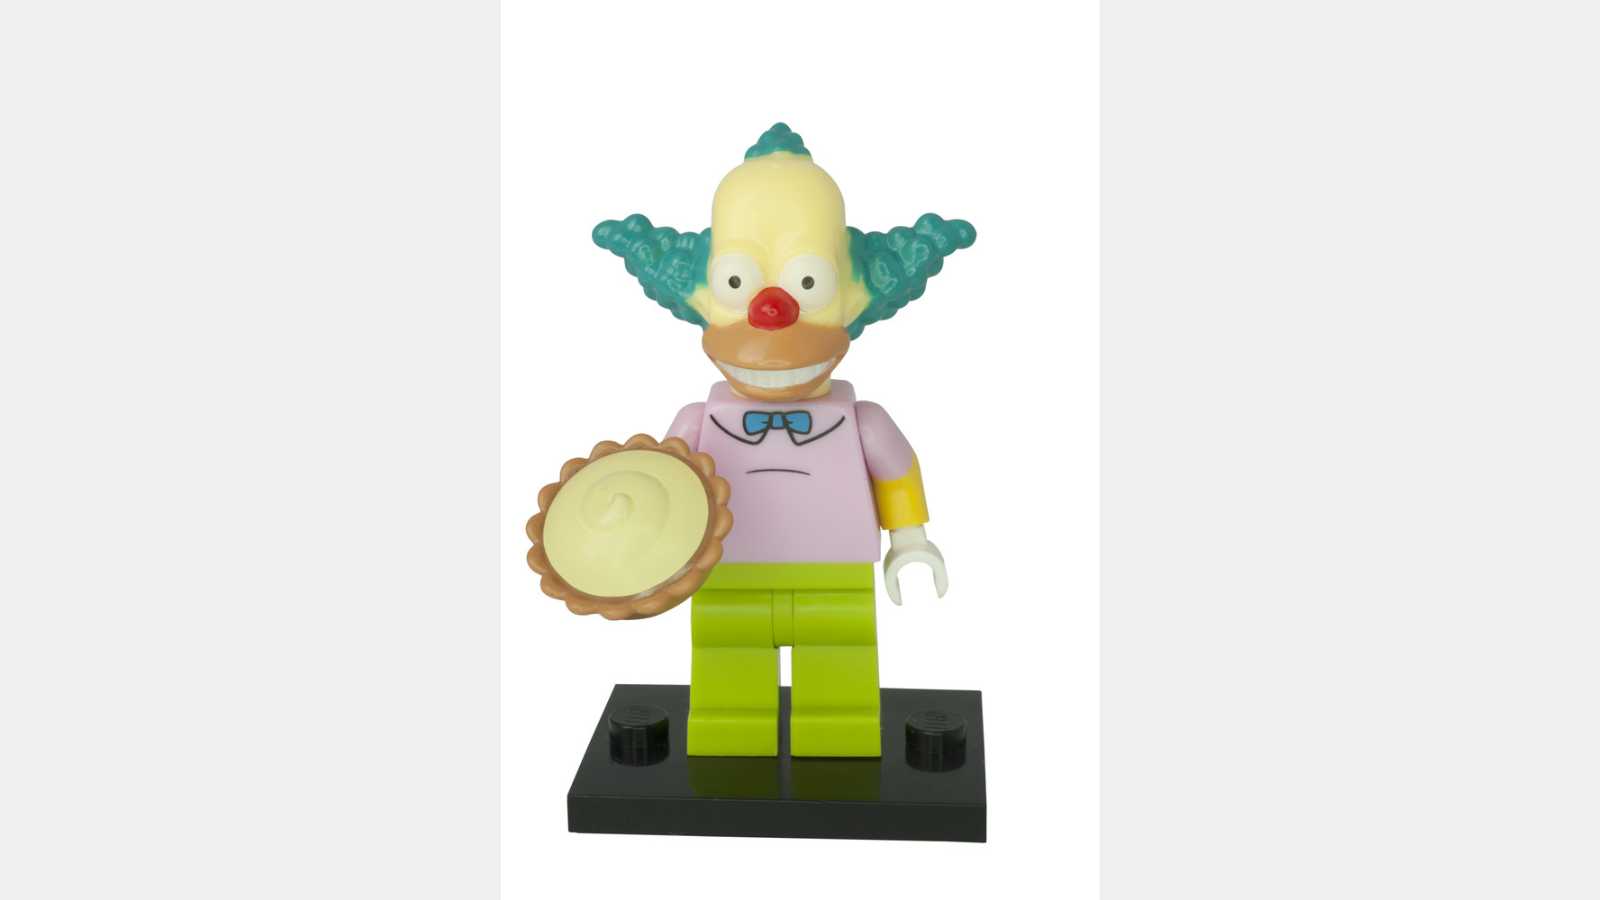 ADELAIDE, AUSTRALIA - August 11 2014:A studio shot of a Krusty The Clown Lego minifigure from the animated series The Simpsons. Lego is extremely popular worldwide with children and collectors.